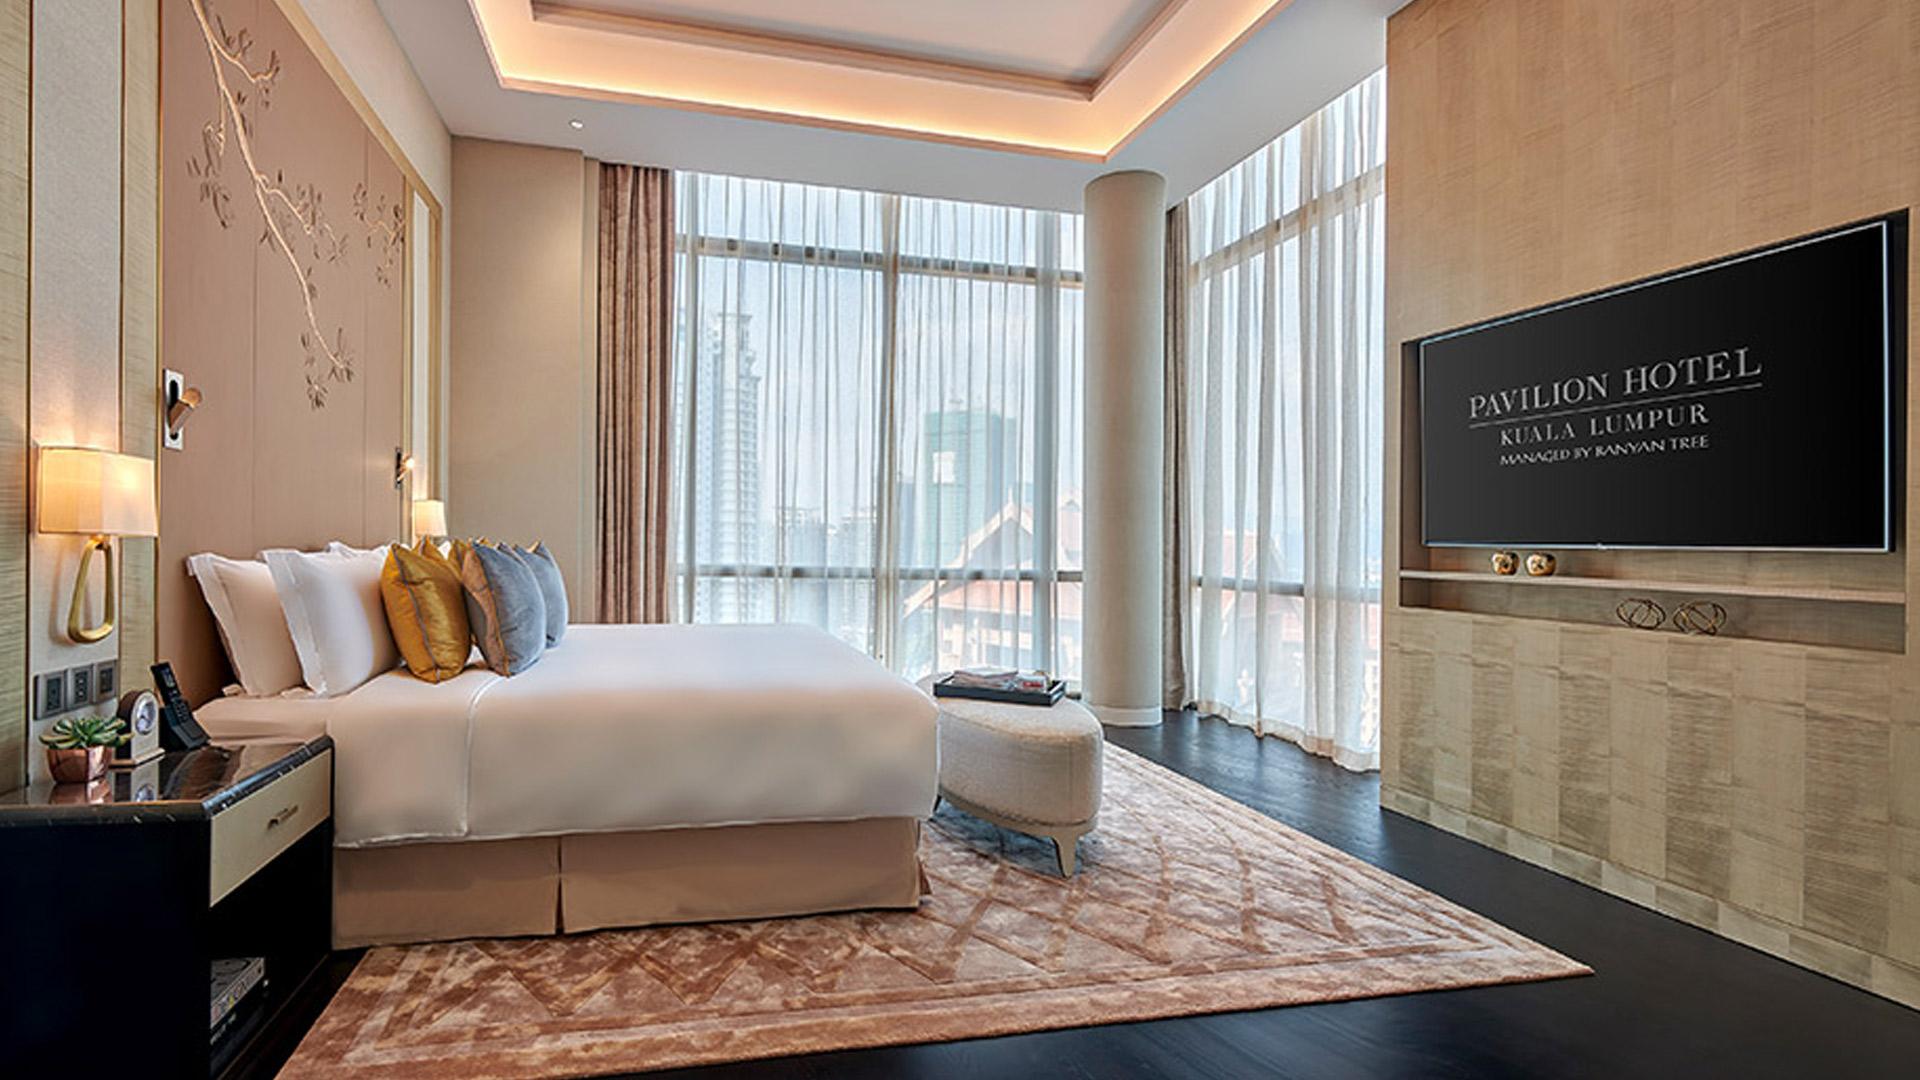 Banyan Tree Malaysia Pavilion Hotel Accommodation - Presidential Suite King Bedroom